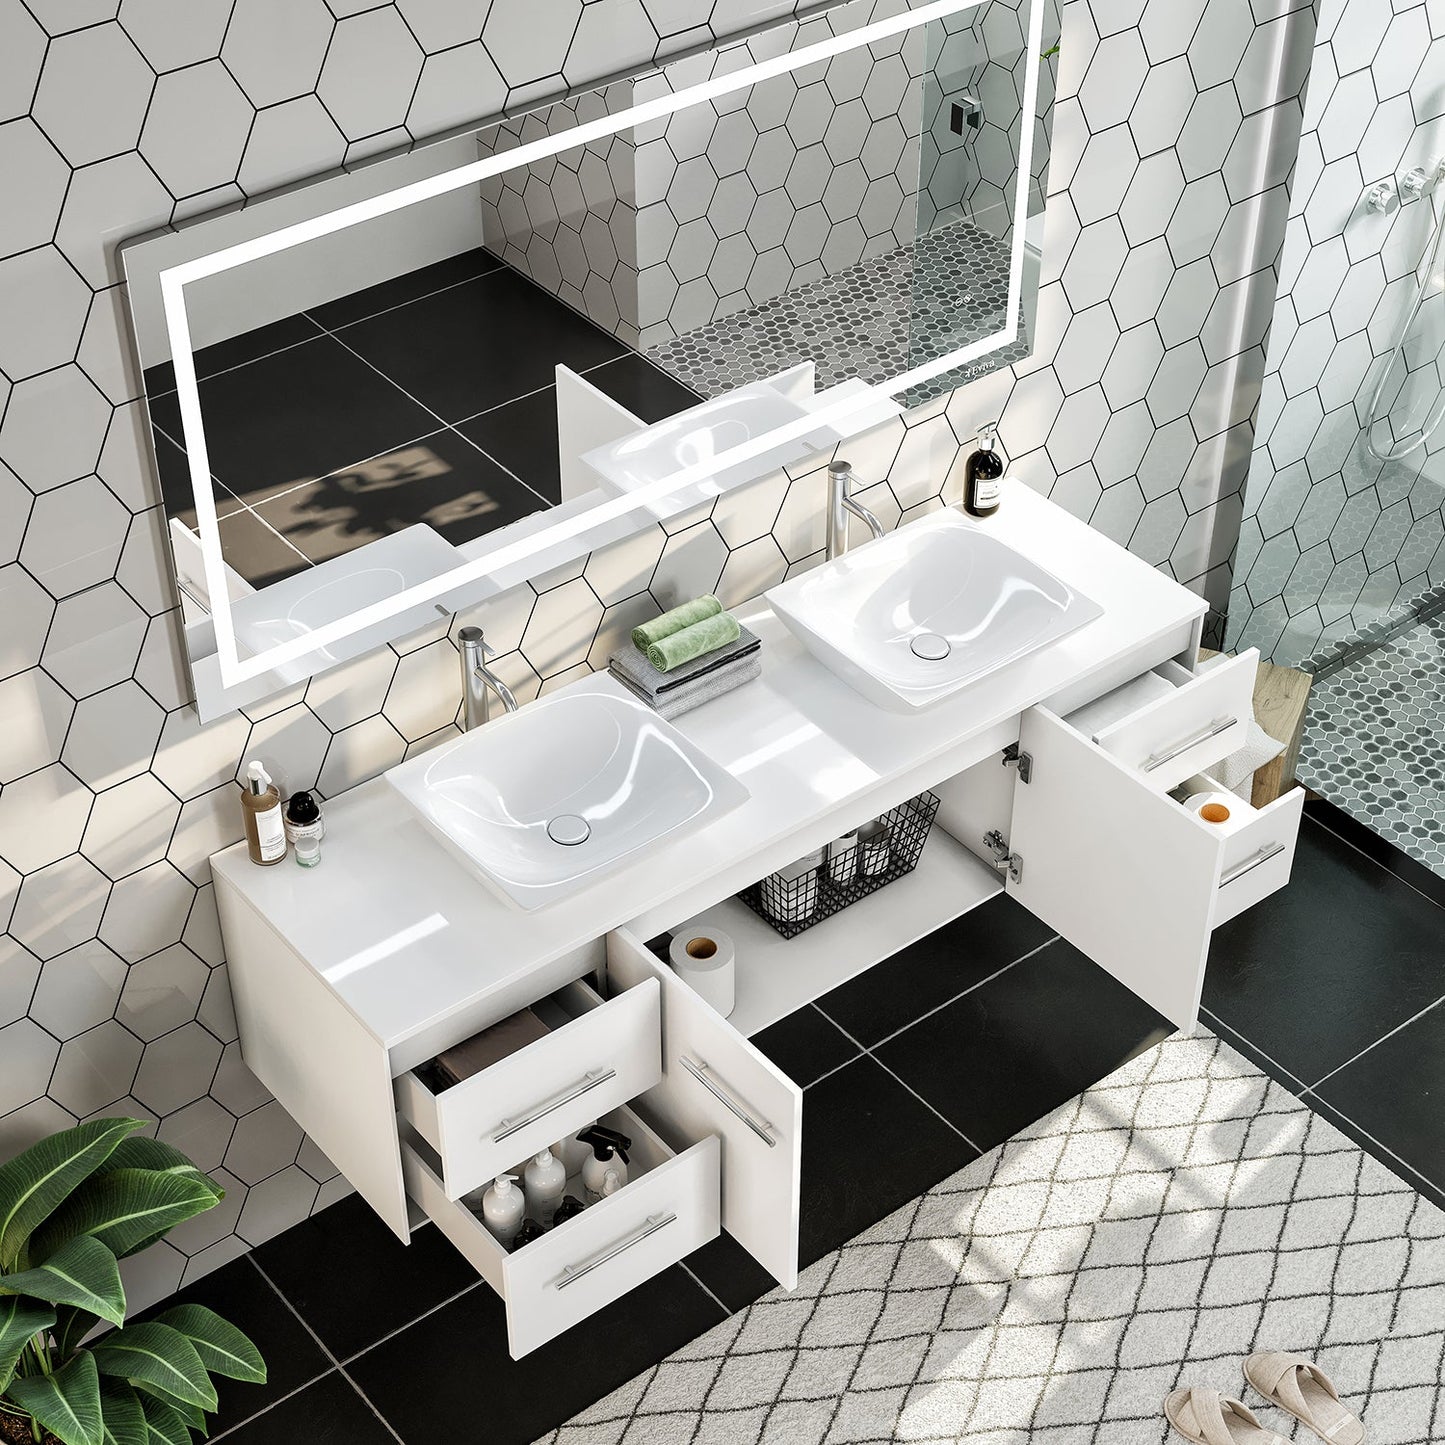 Wave 60"W x 22"D White Double Sink Bathroom Vanity with White Quartz Countertop and Vessel Porcelain Sink